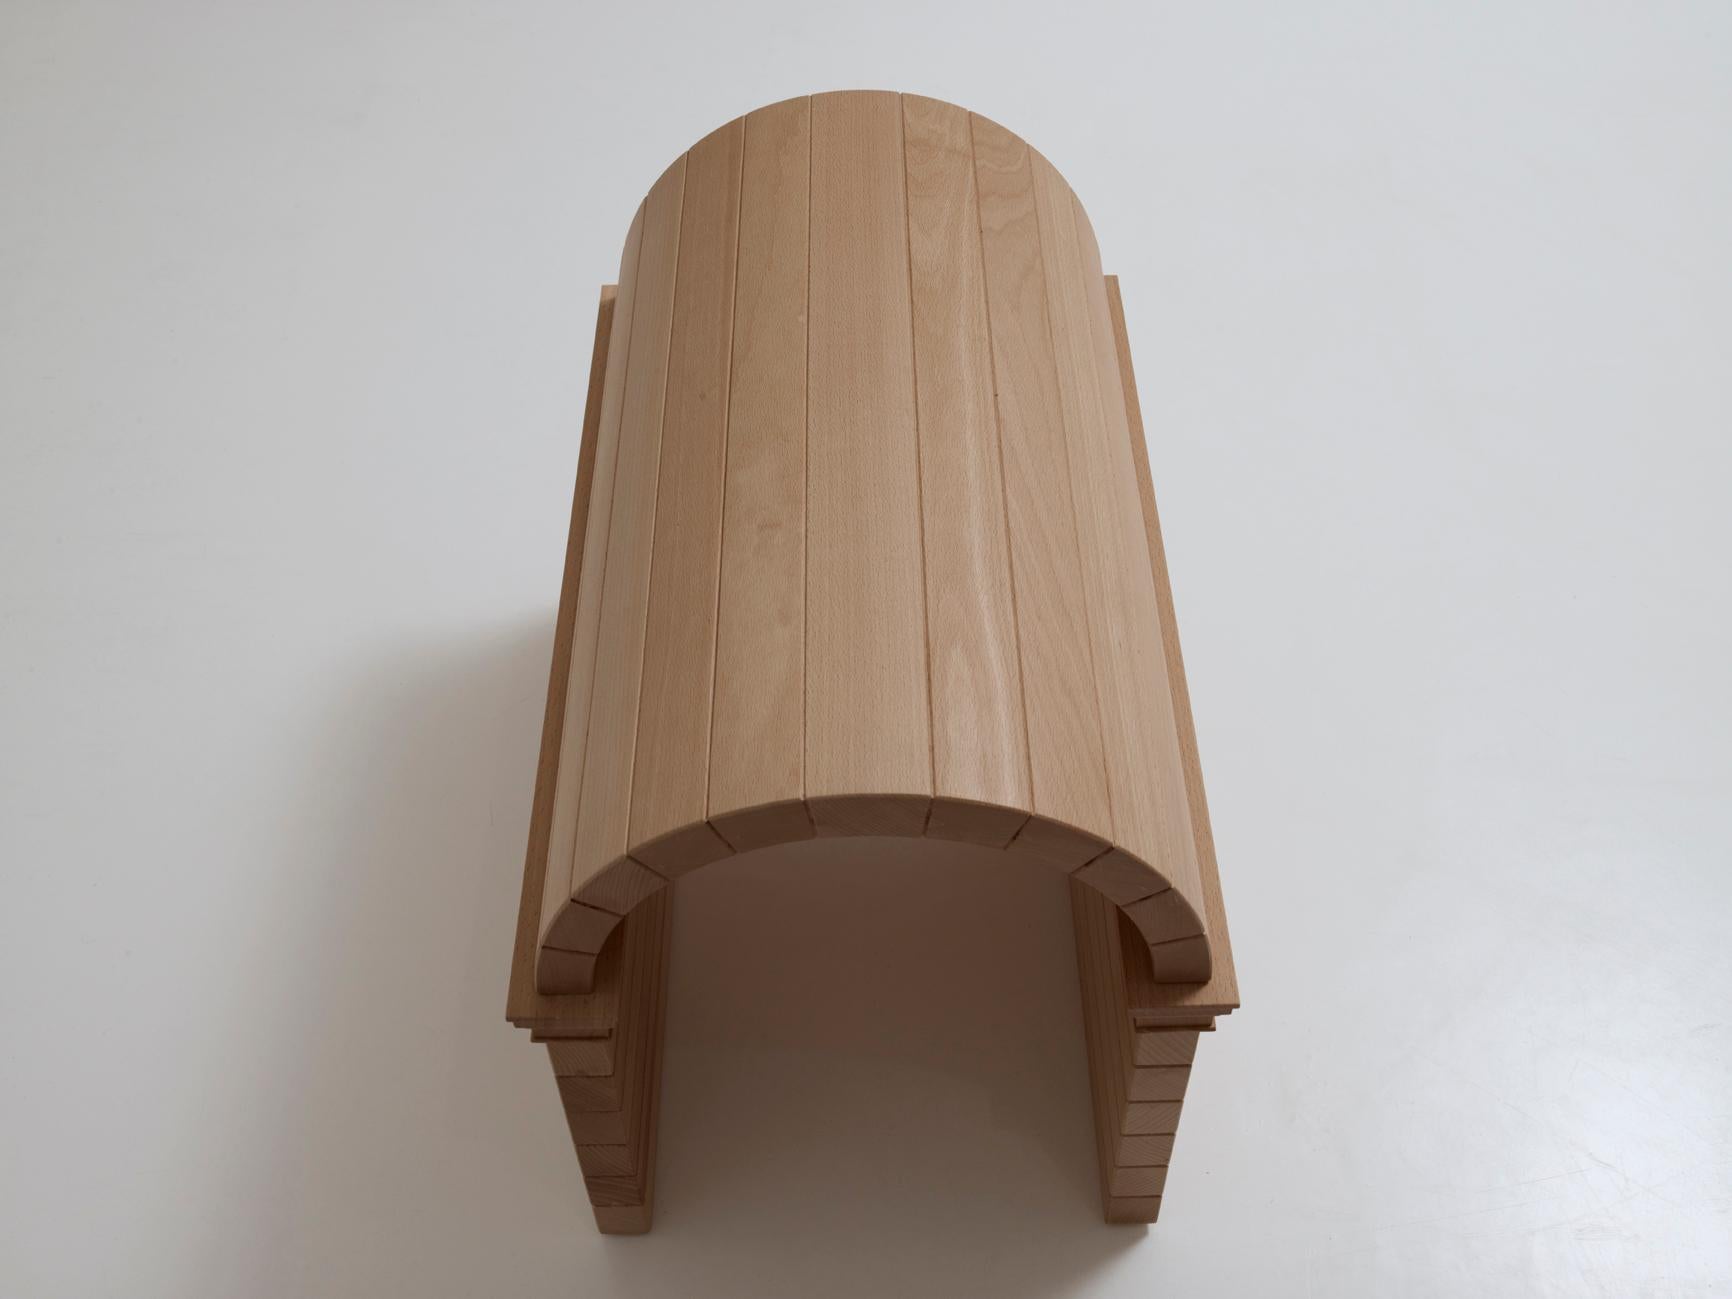 Italian Modern Ron Gilad for Dilmos Limited Edition Hardwood Bench Sculpture Stool For Sale